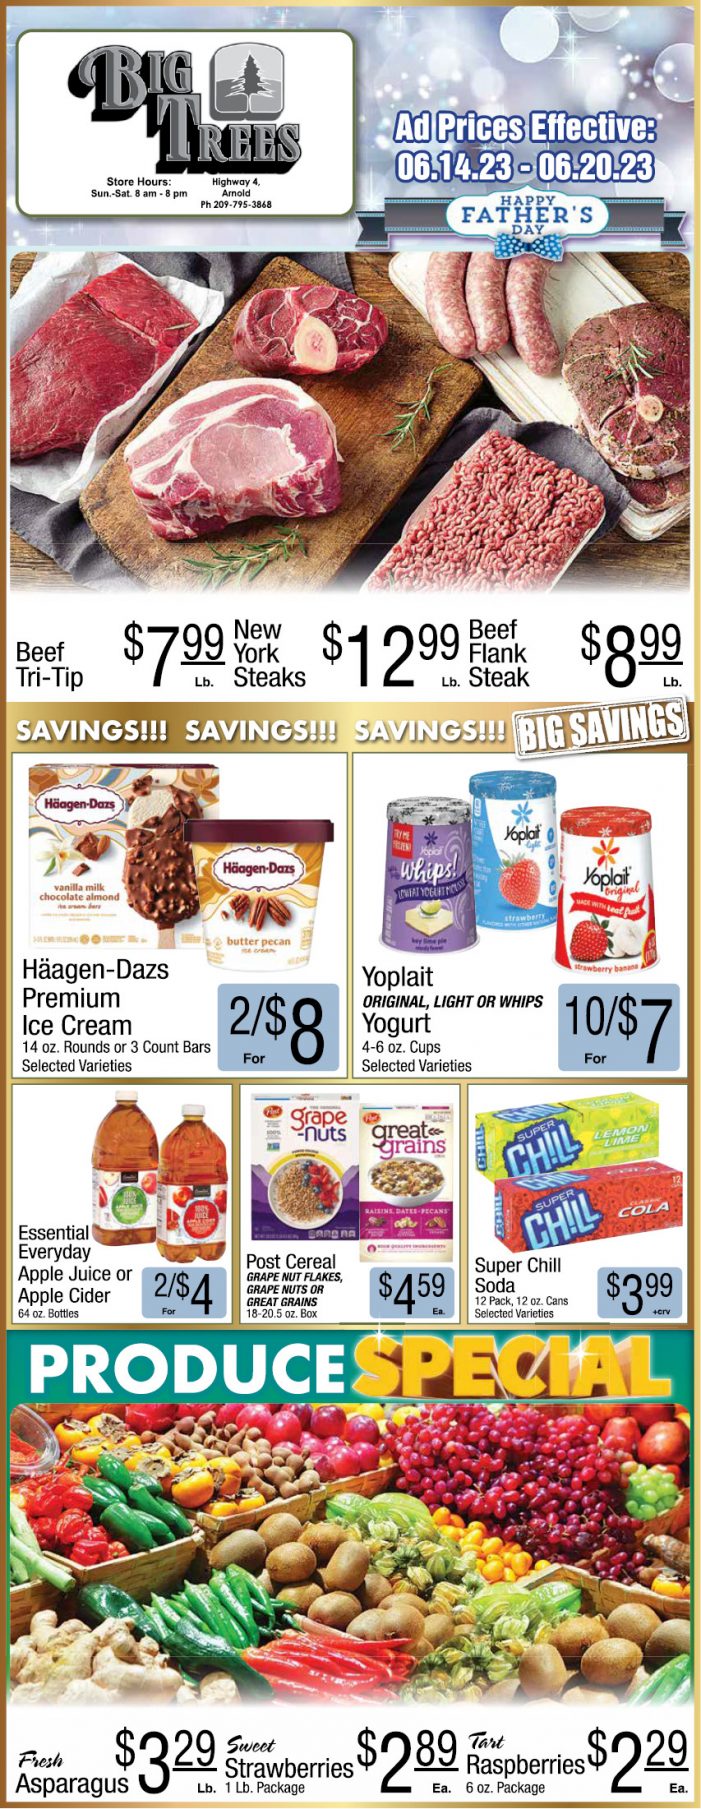 Big Trees Market Weekly Ad, Grocery, Produce, Meat & Deli Specials June 14 ~ 20!  Shop Local & Save!